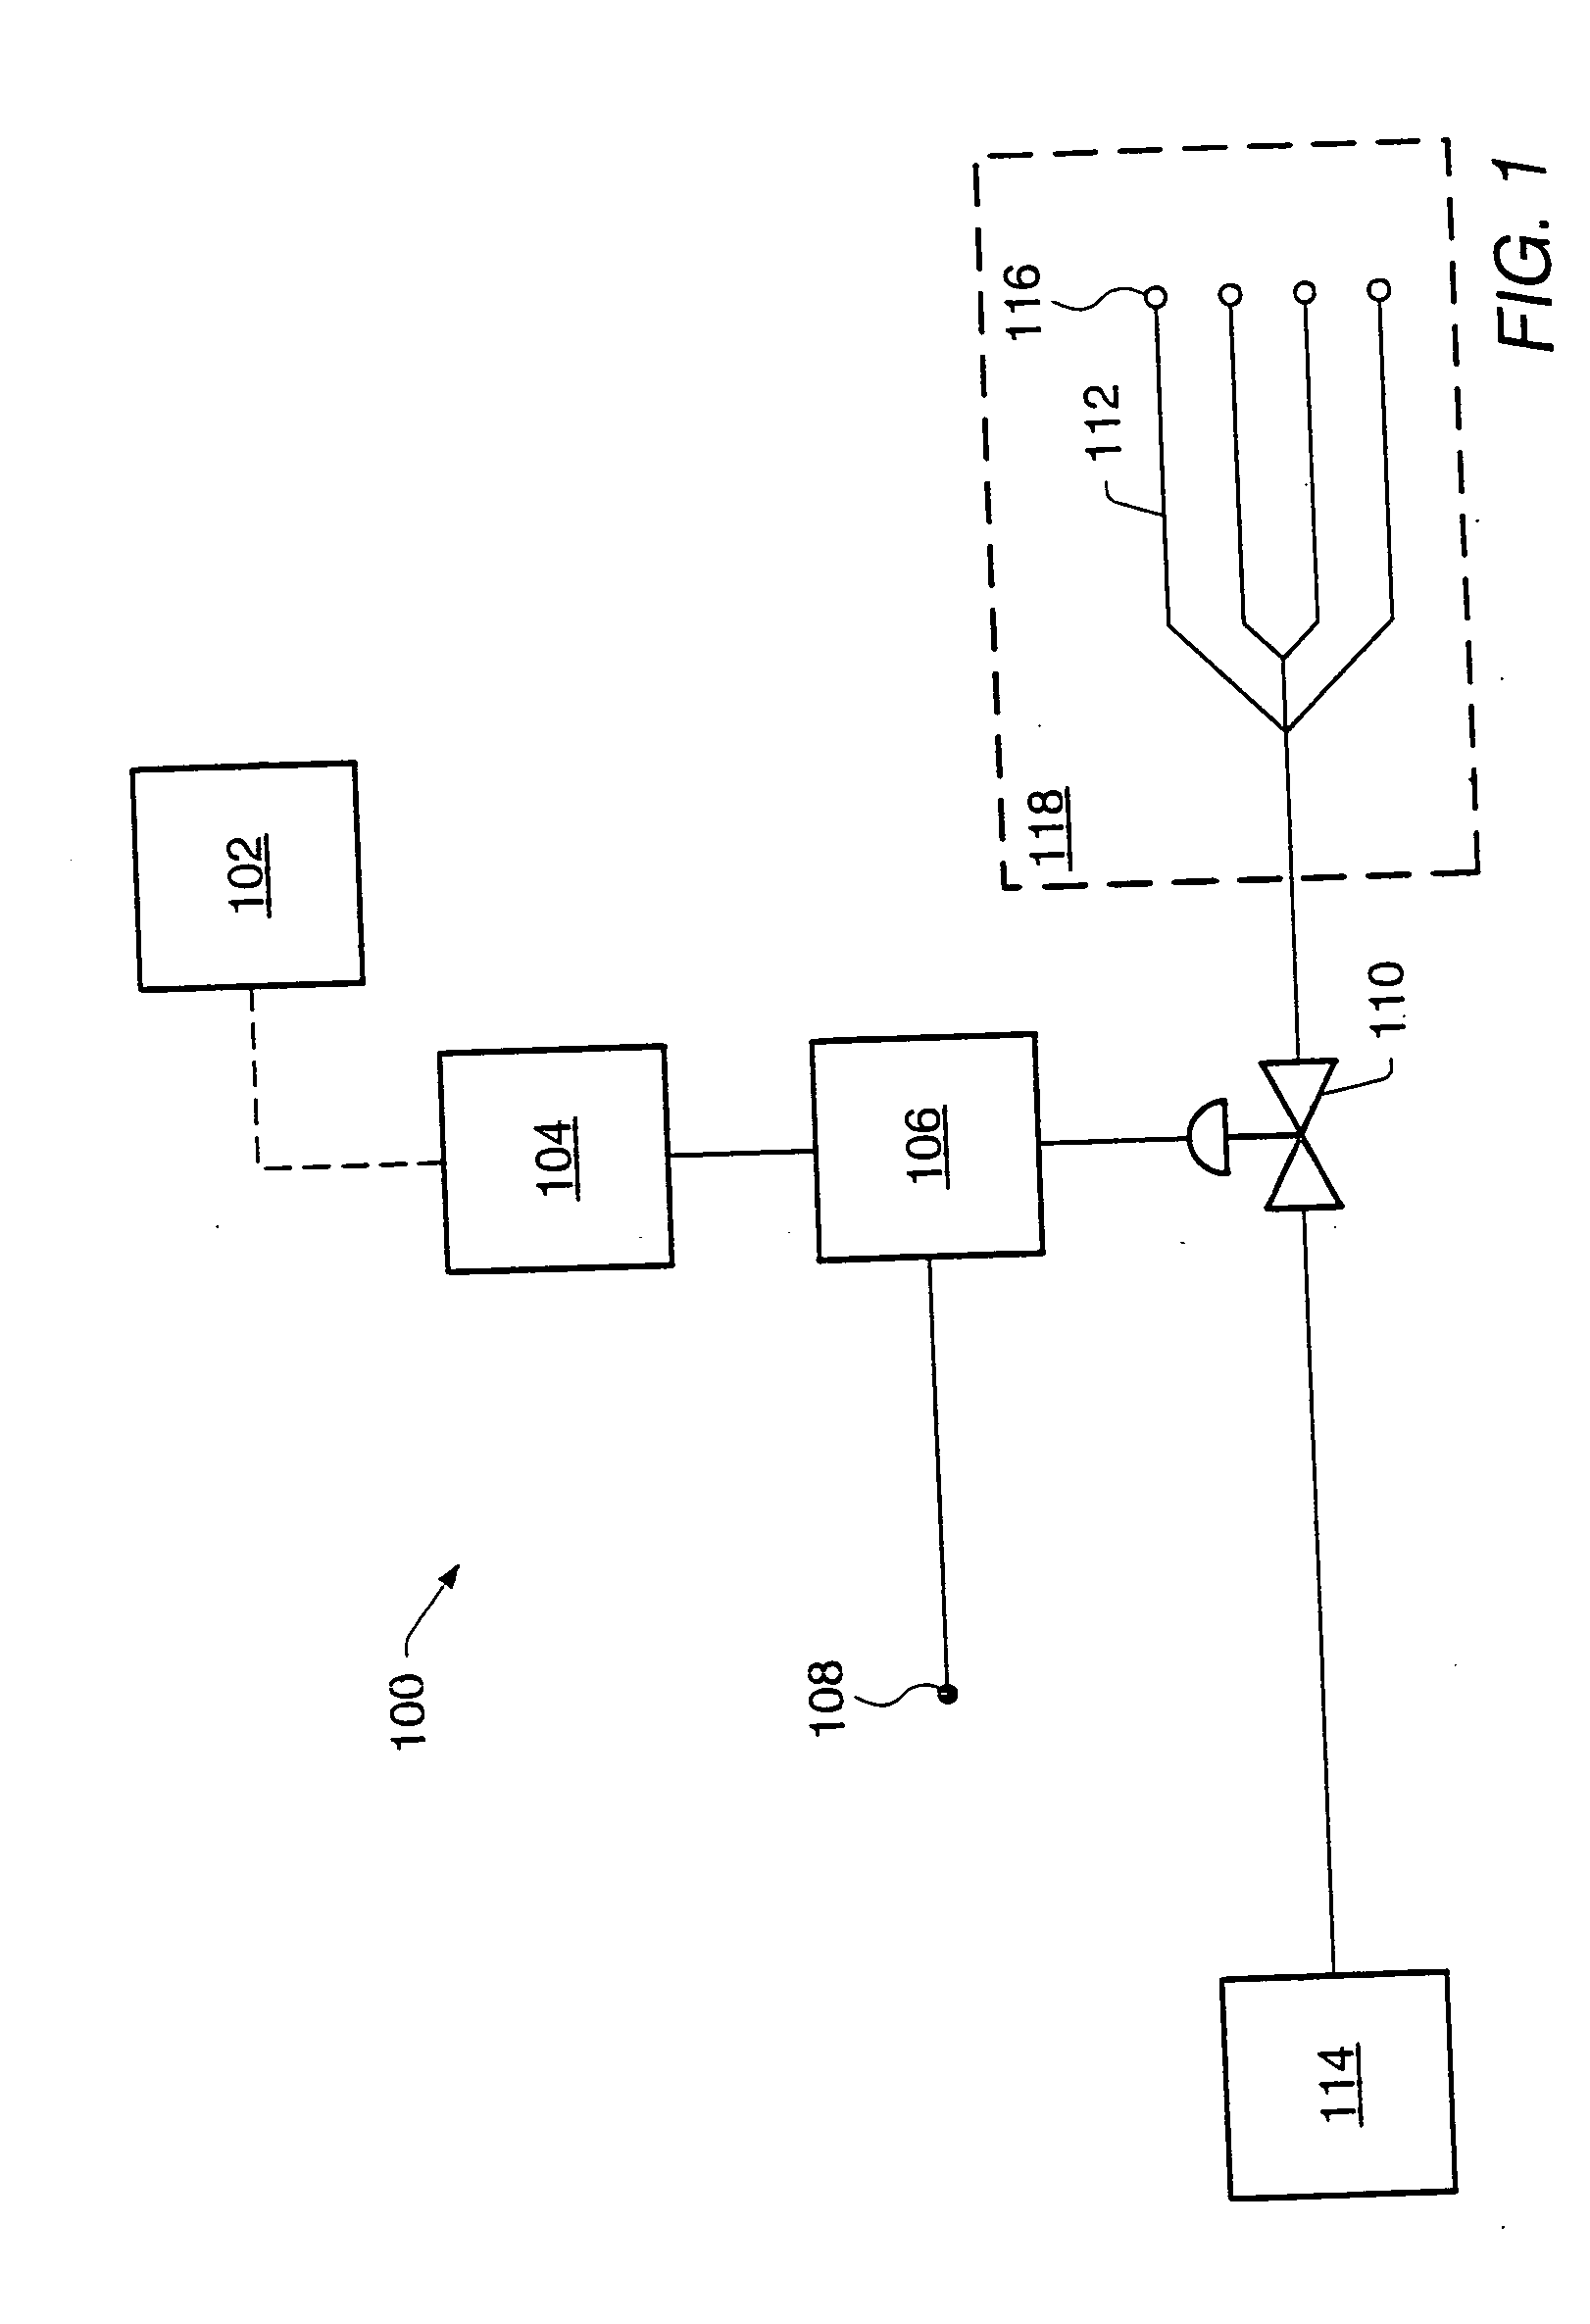 Water irrigation system with solar panel and method of controlling irrigation